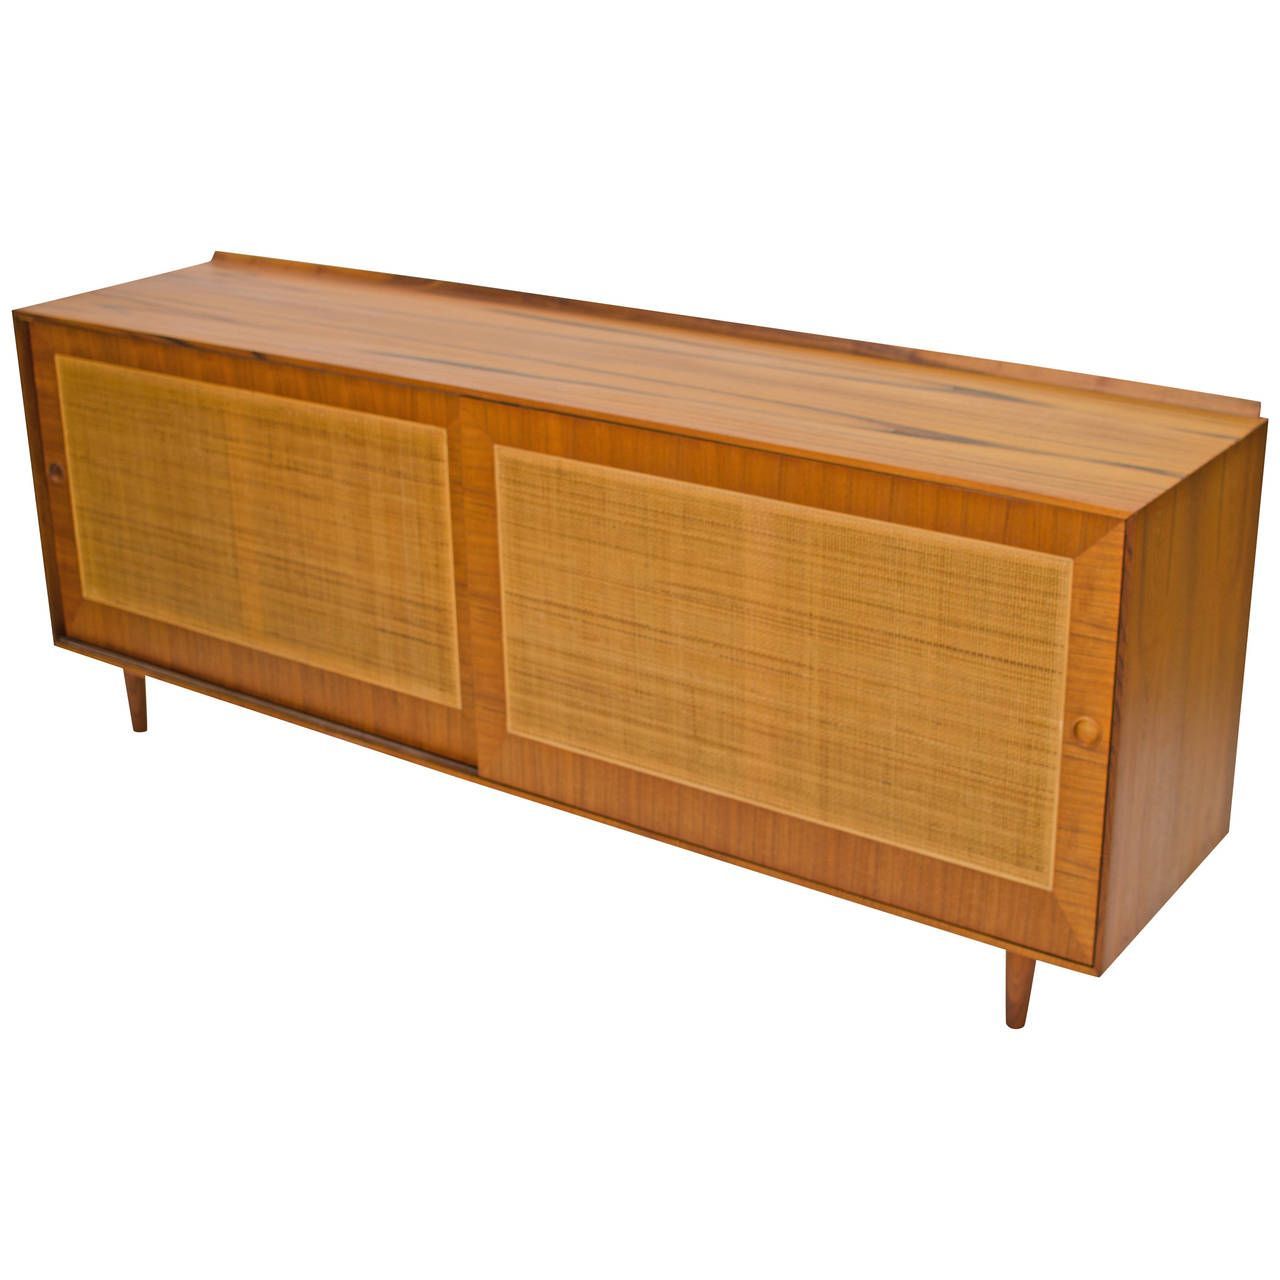 Finn Juhl Designed Sideboard, Circa 1952 | Modern Cane Inside Best And Newest Womack Sideboards (View 13 of 20)